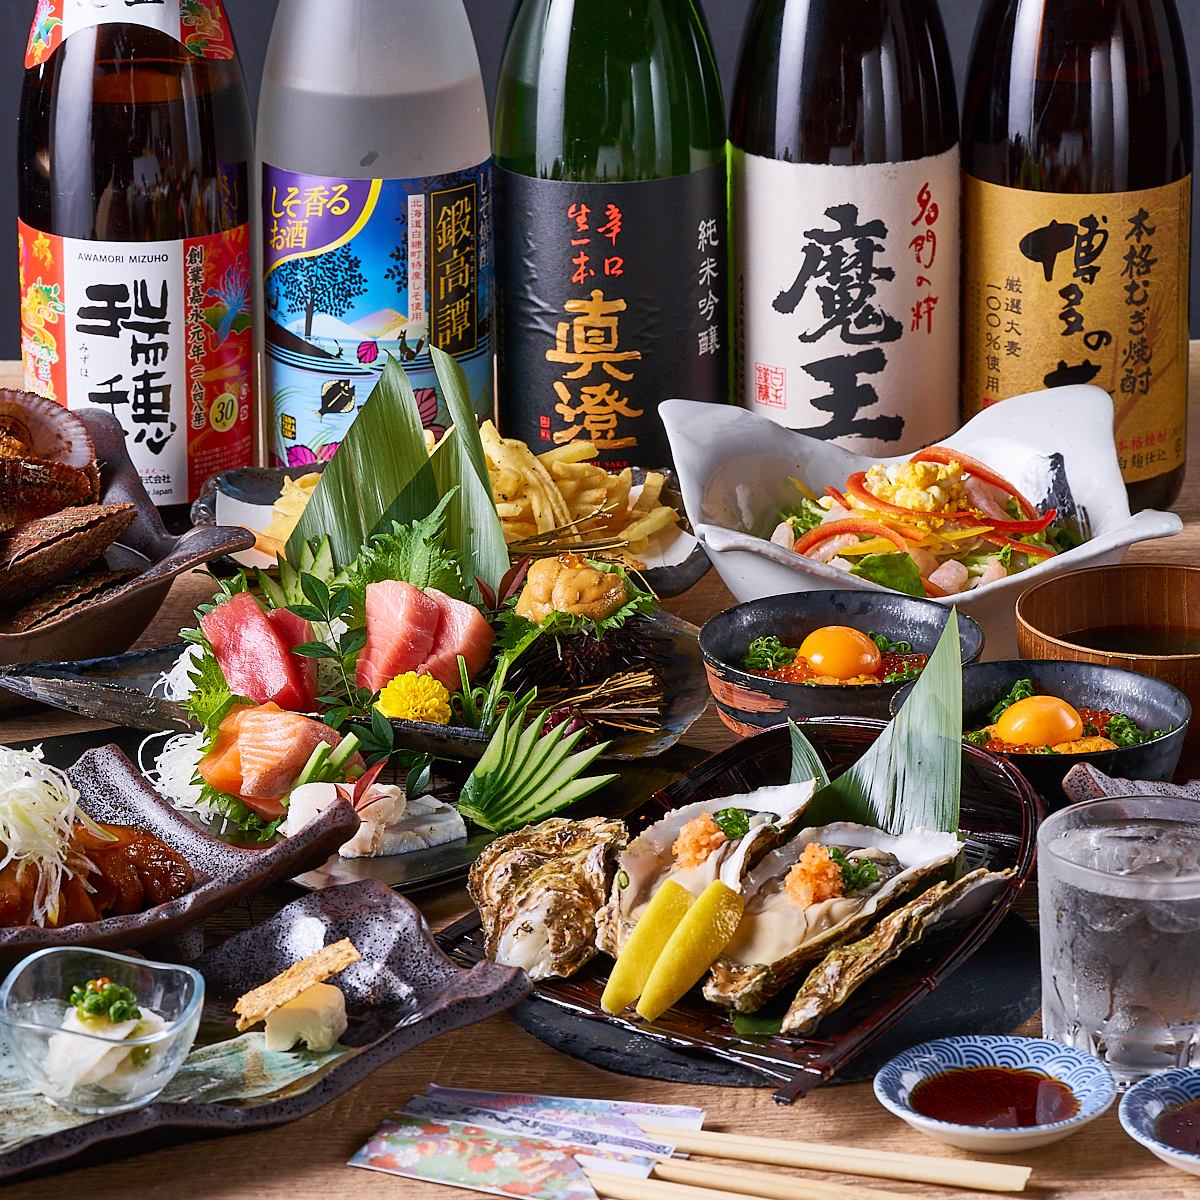 Banquet course with all-you-can-drink for 2 hours with fresh fish and creative Japanese food in a private room 4000 yen ~ ♪